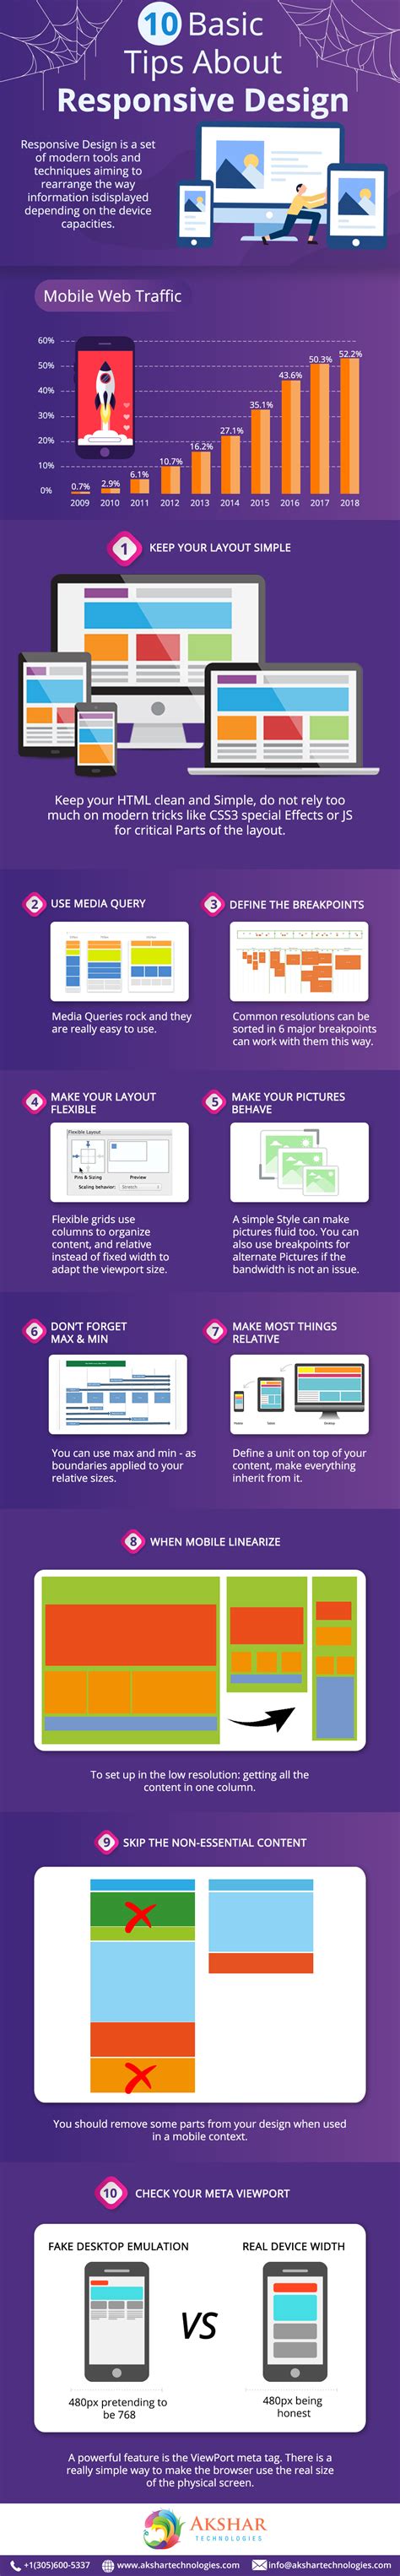 10 Basic Tips About Responsive Design